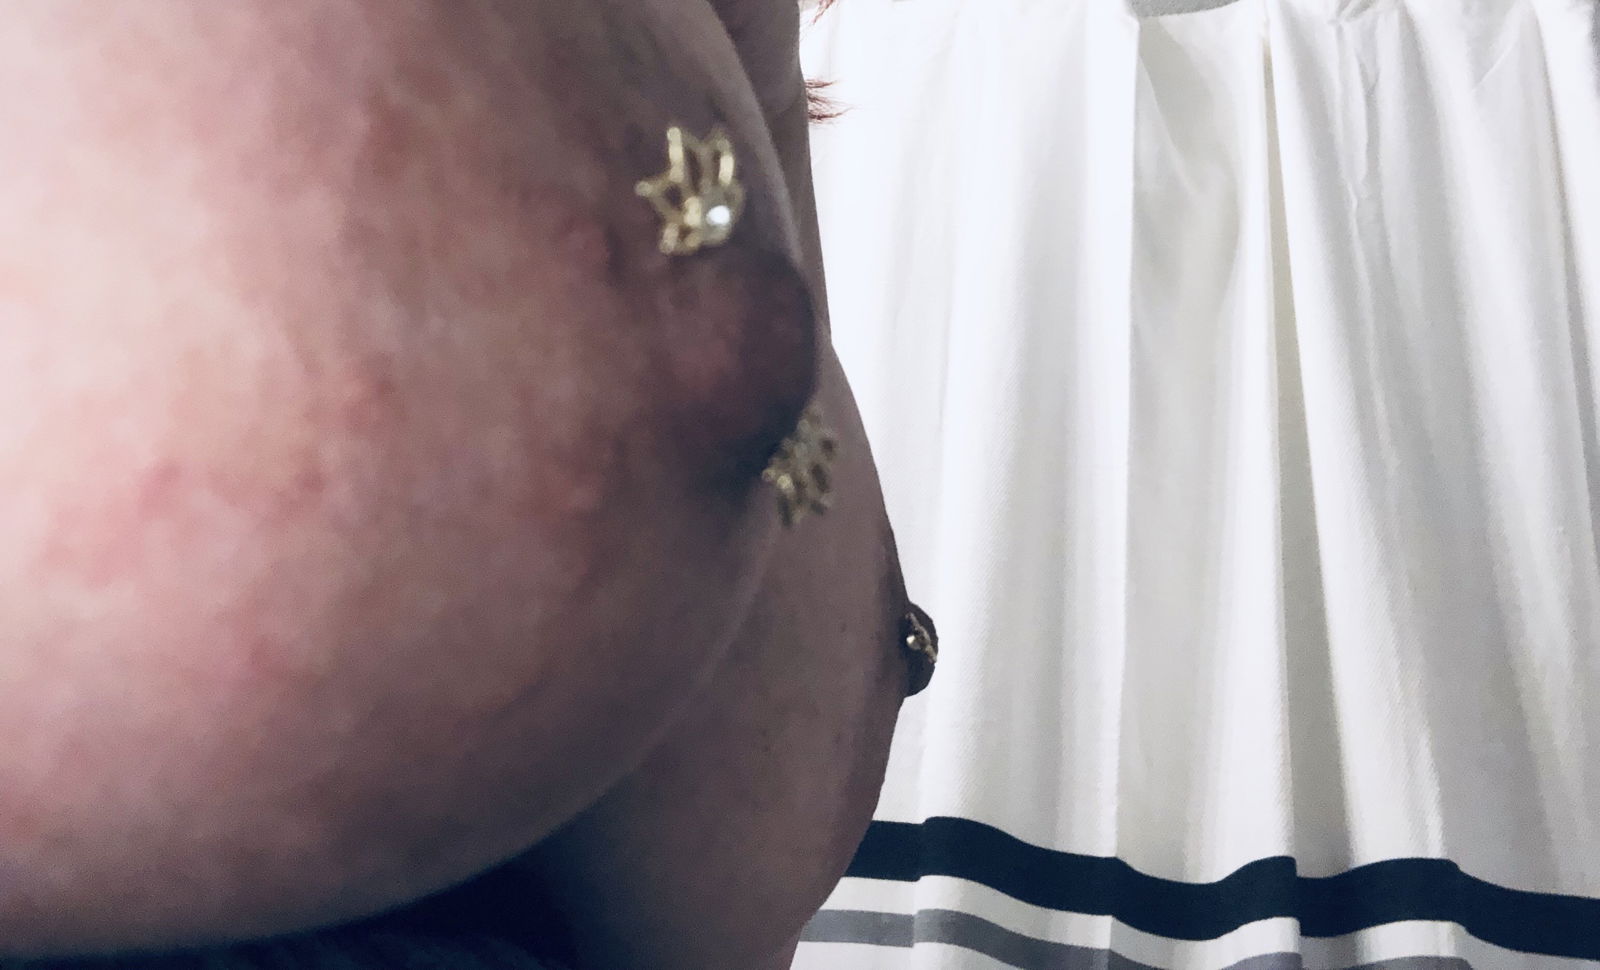 Watch the Photo by IrishMermaid with the username @IrishMermaid, posted on June 9, 2019. The post is about the topic Pierced Nipples. and the text says 'Tease them please'